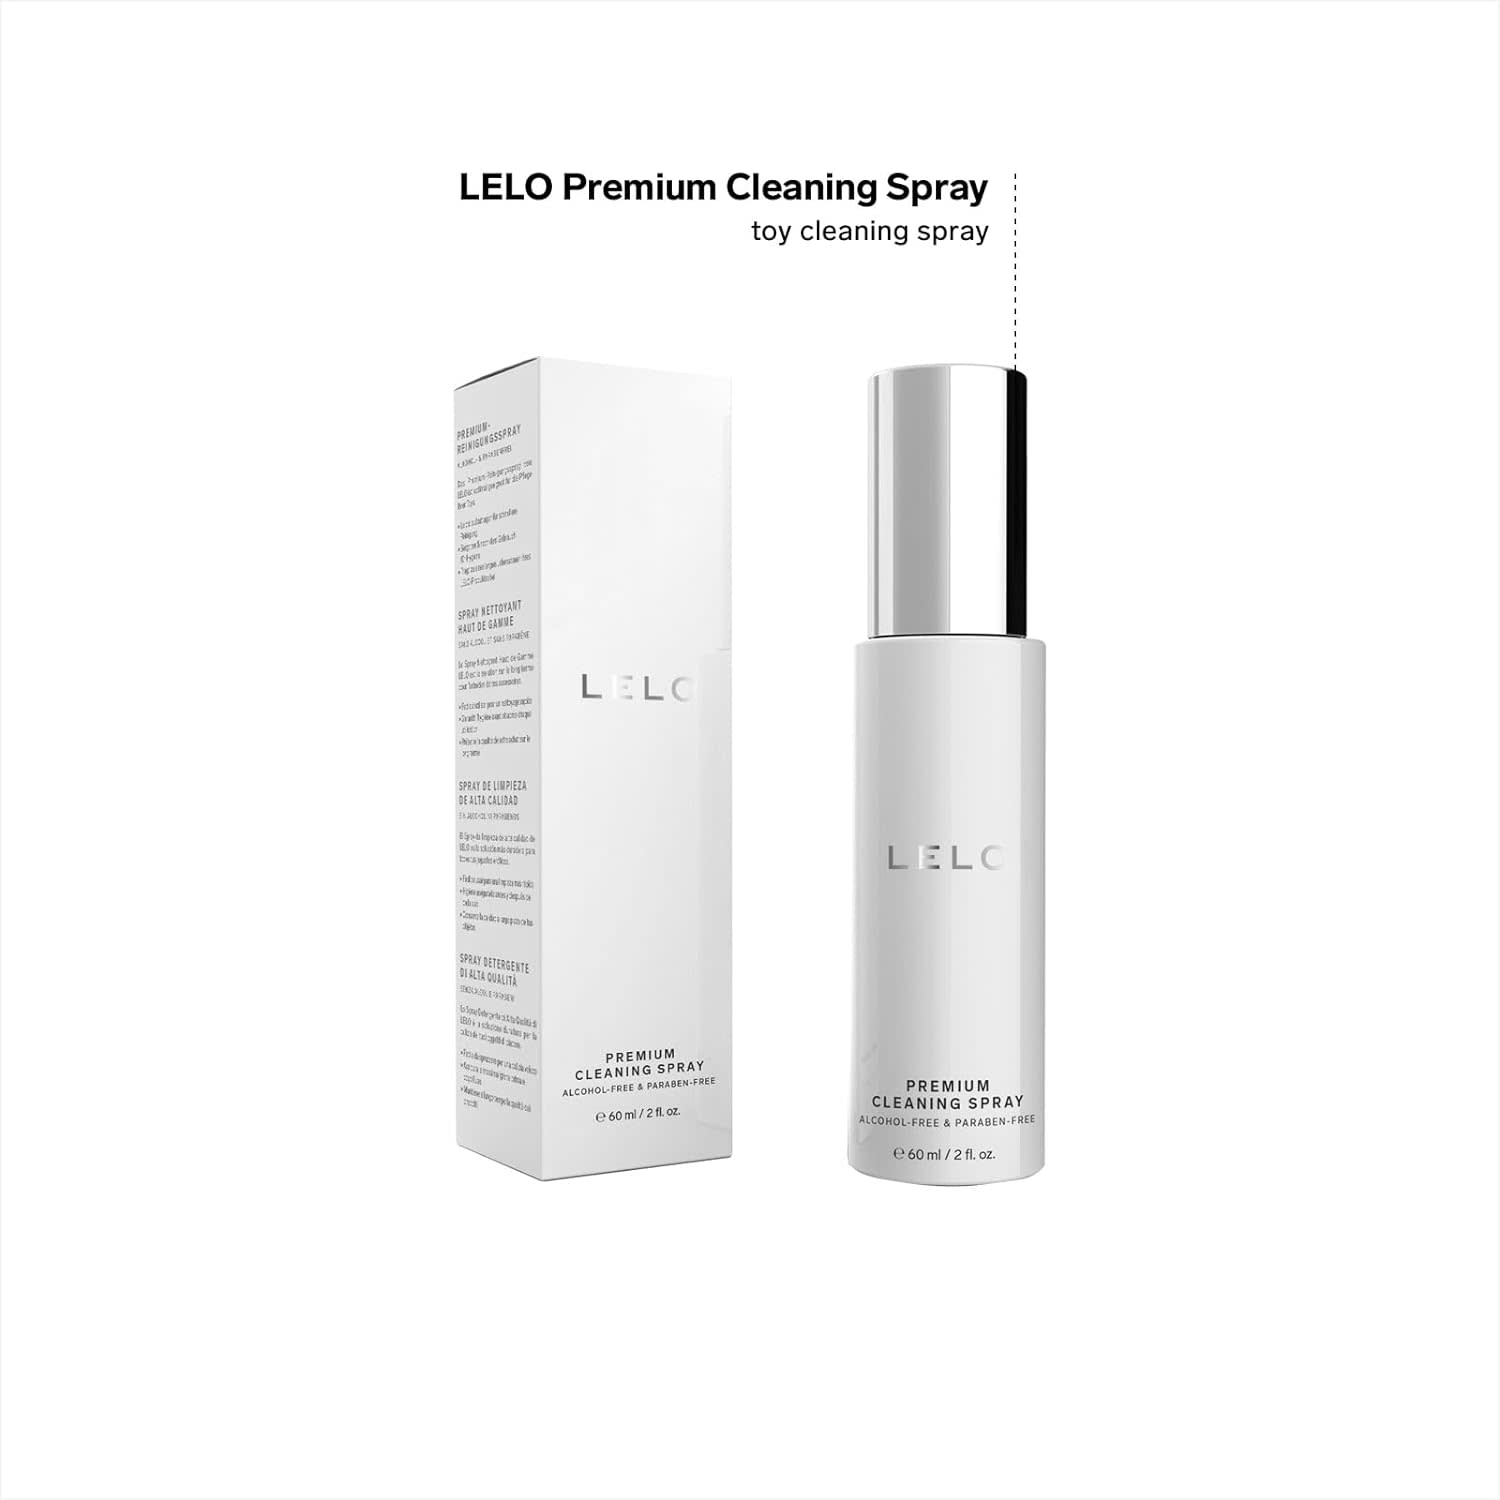 LELO Toy Cleaning Spray, Adult Toy Cleaner, Fast-Acting for Quick Maintenance (60 ml/2 fl. oz)